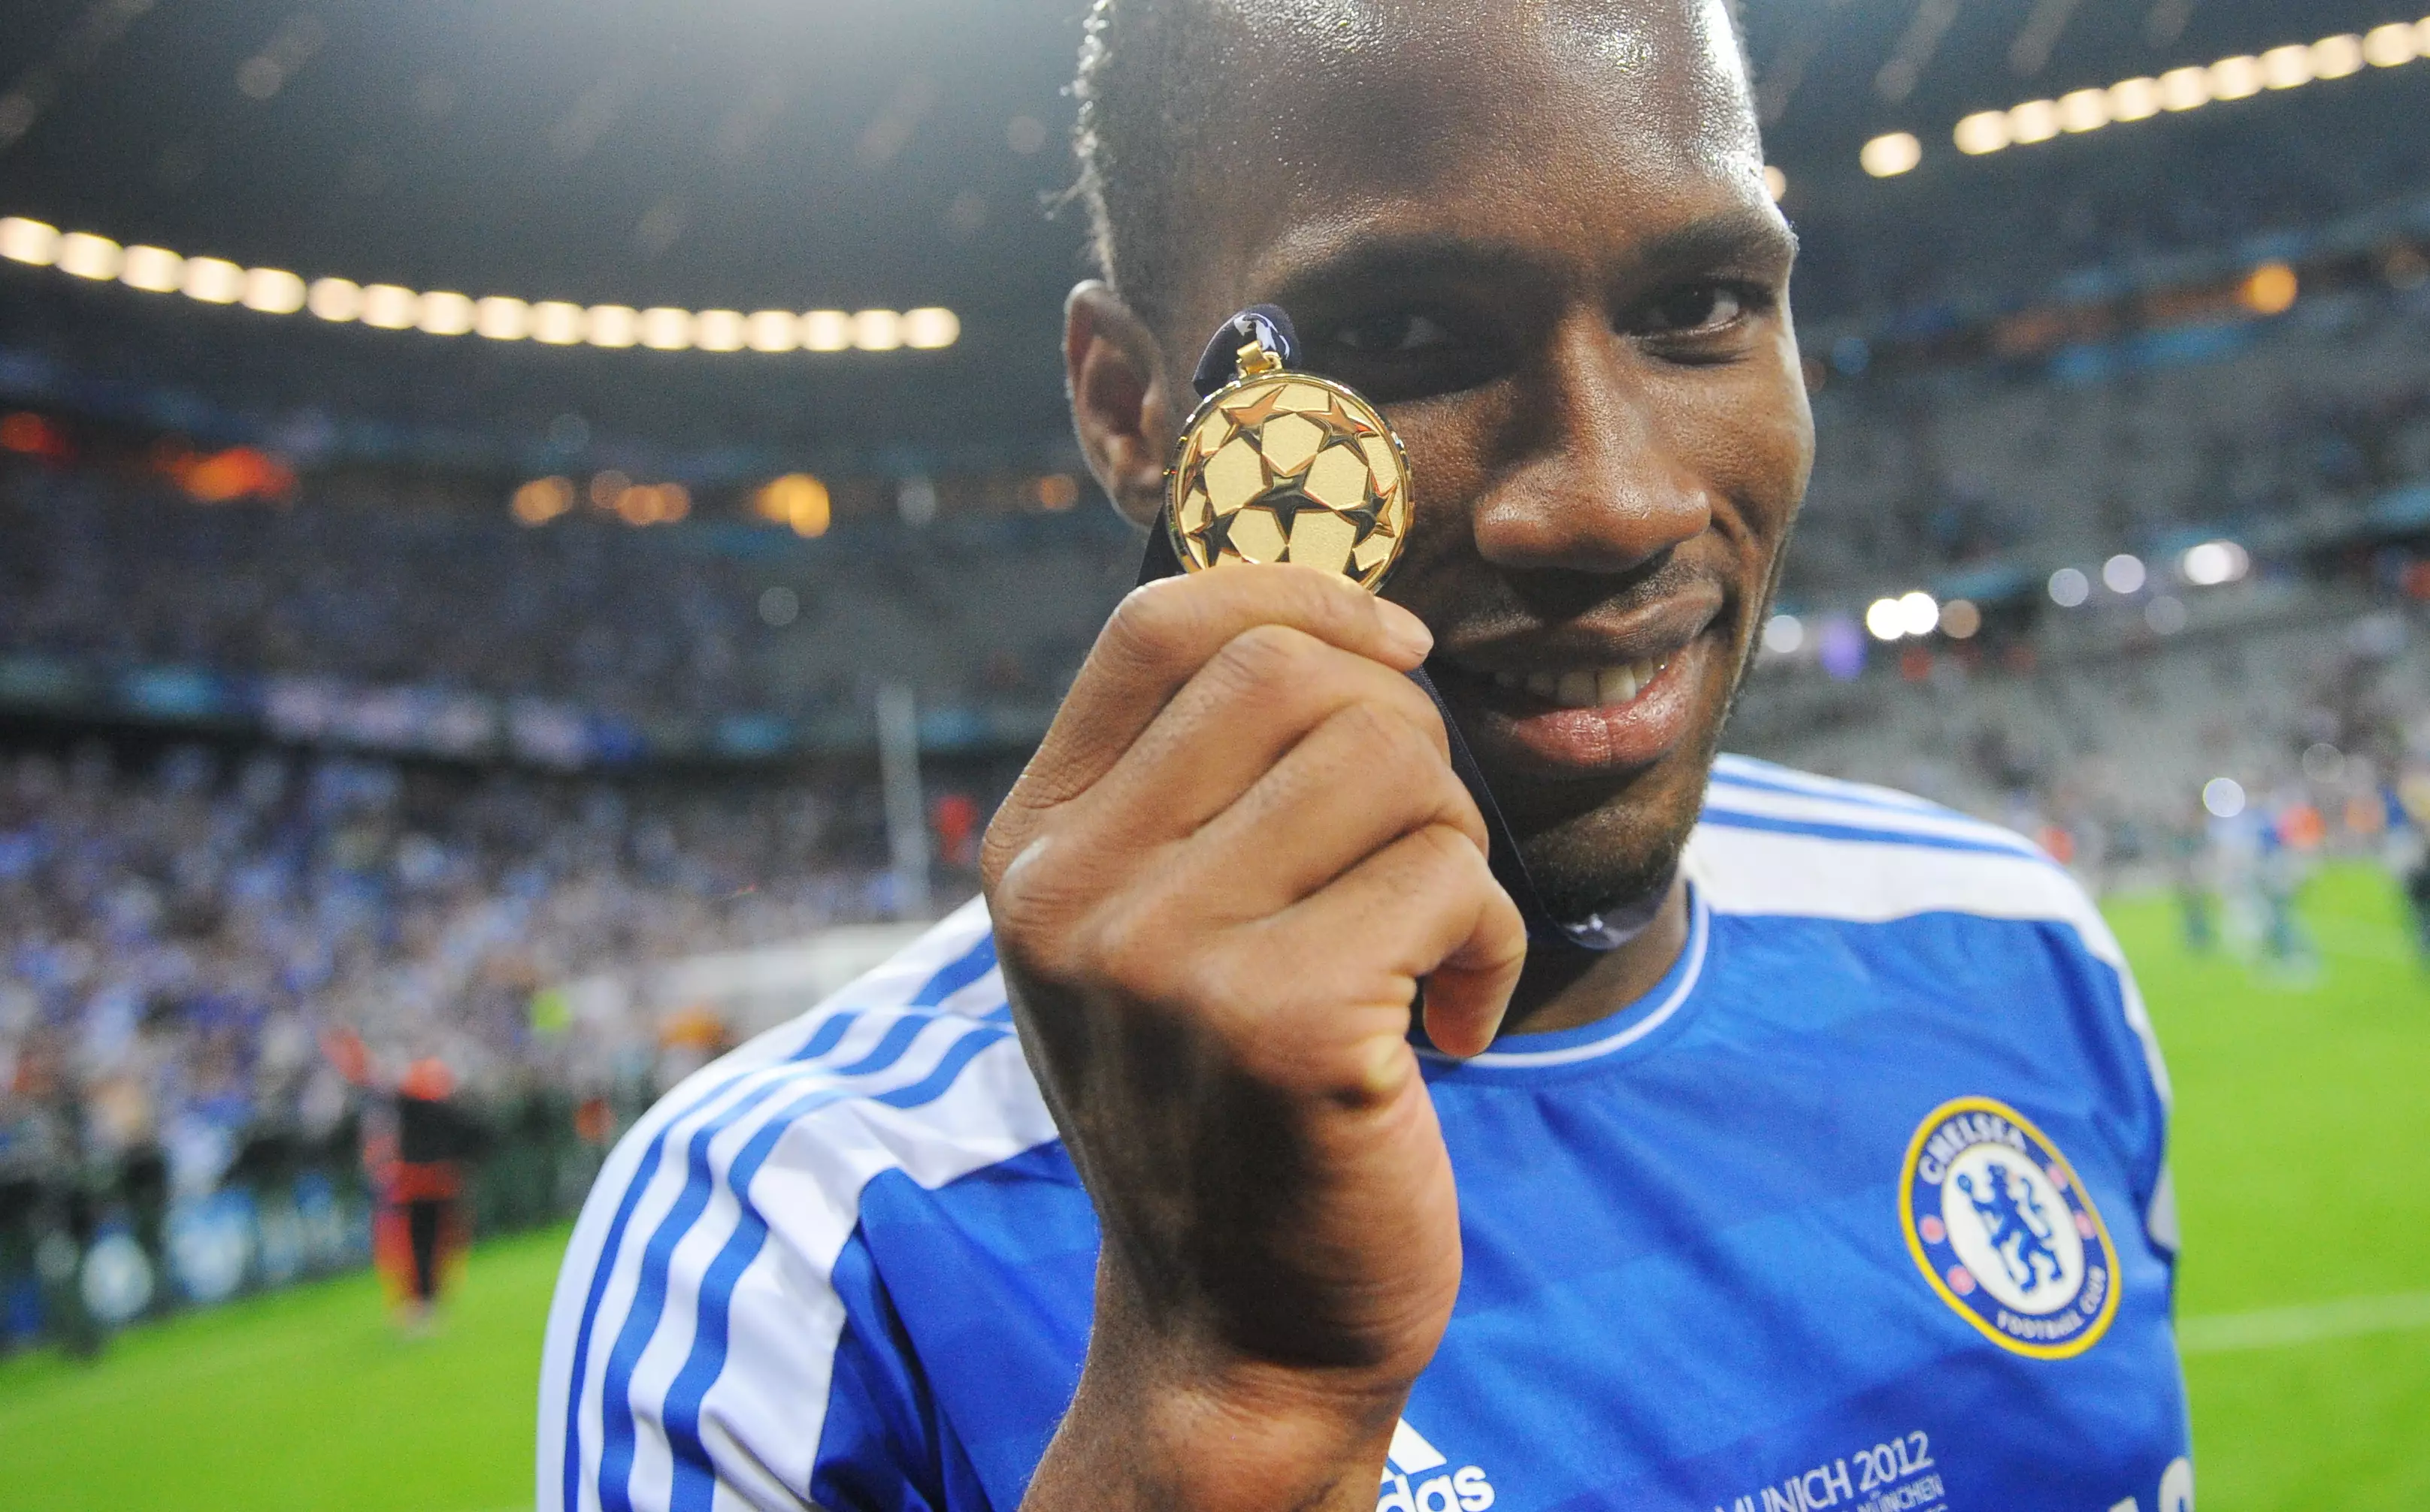 Drogba scored the winning penalty to win the Blues the Champions League final. Image: PA Images